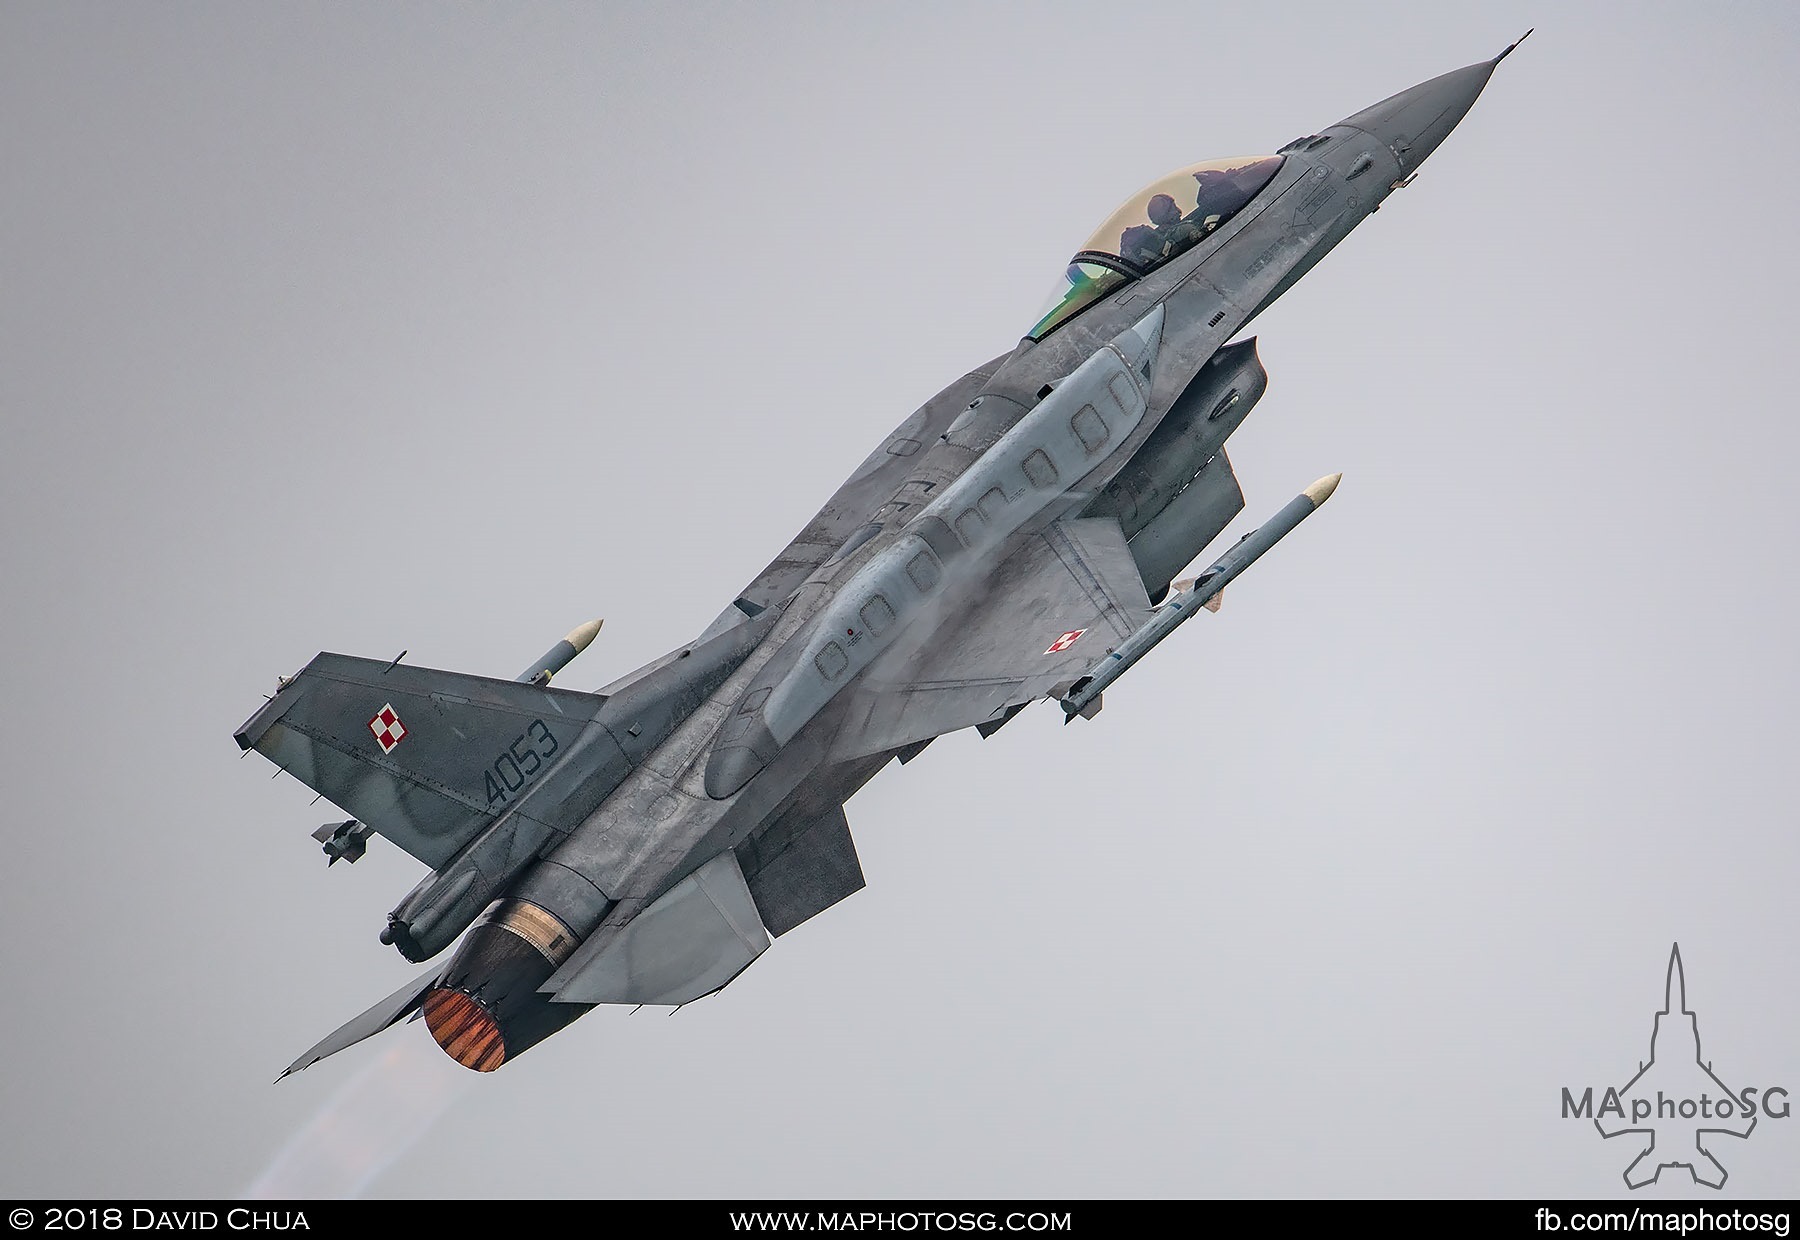 59. Polish Air Force F-16C pulls up with afterburners as it begins the aerial display